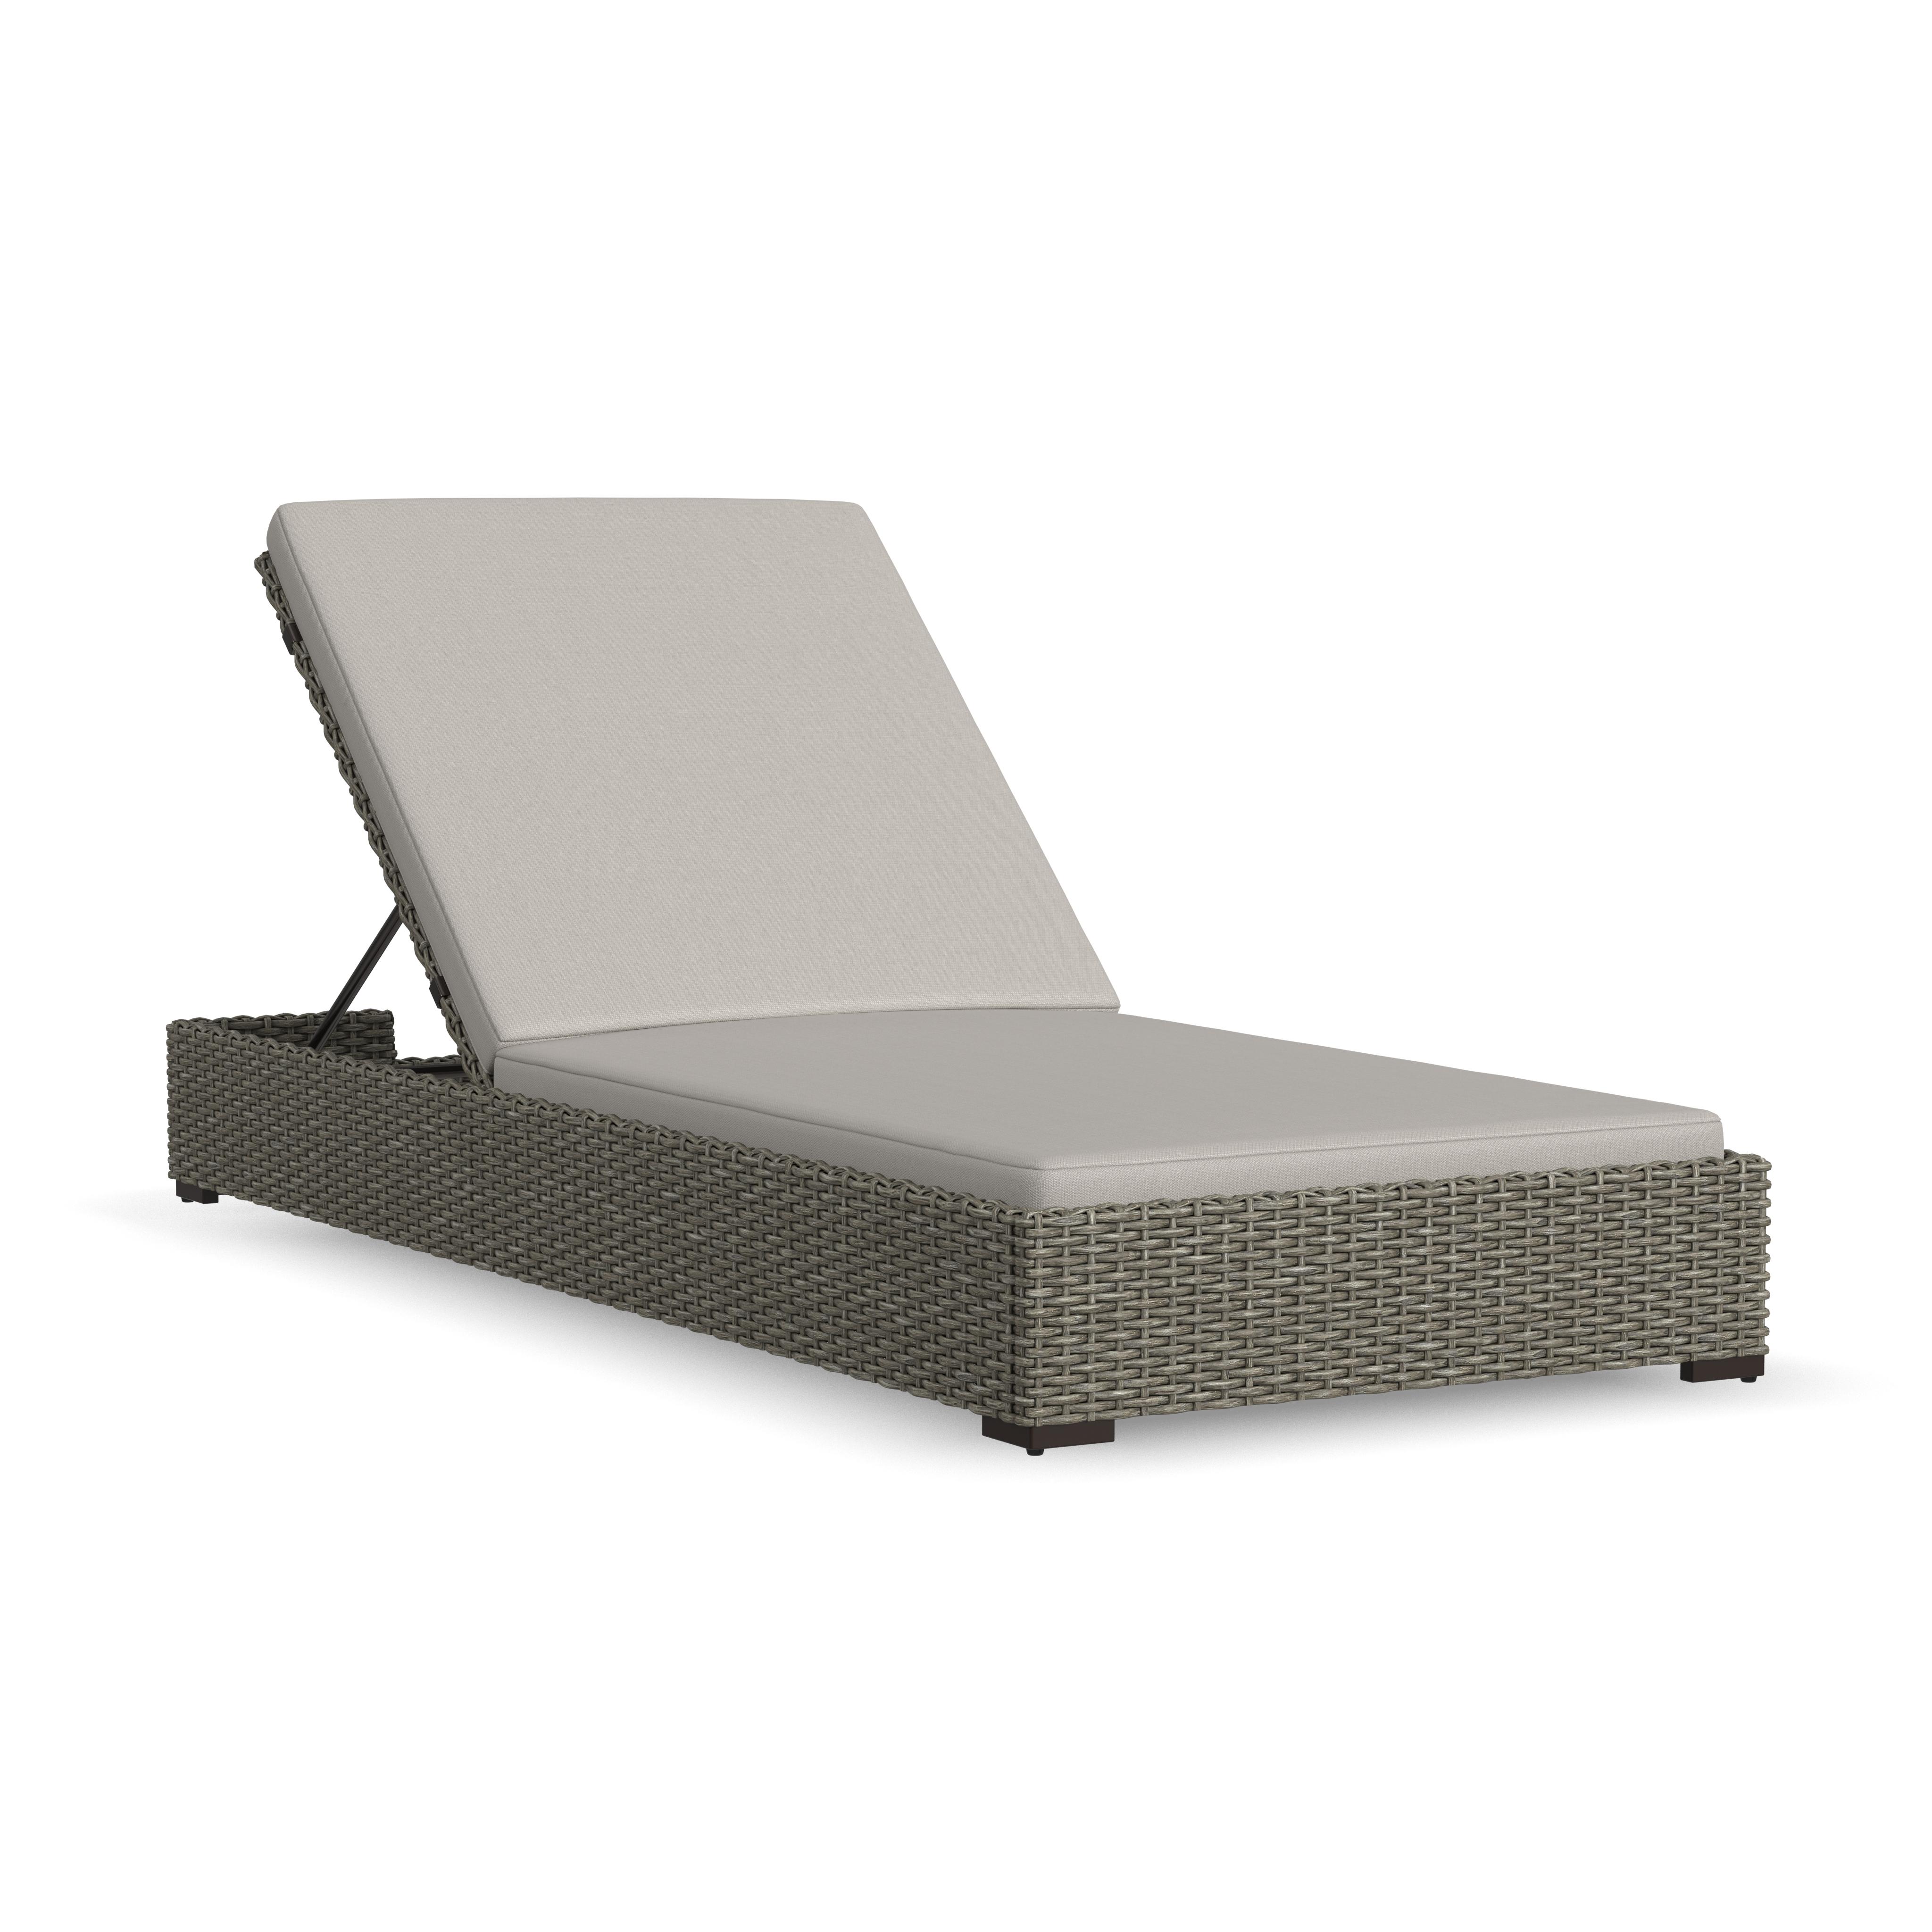 Homestyles Boca Raton Outdoor Chaise Lounge